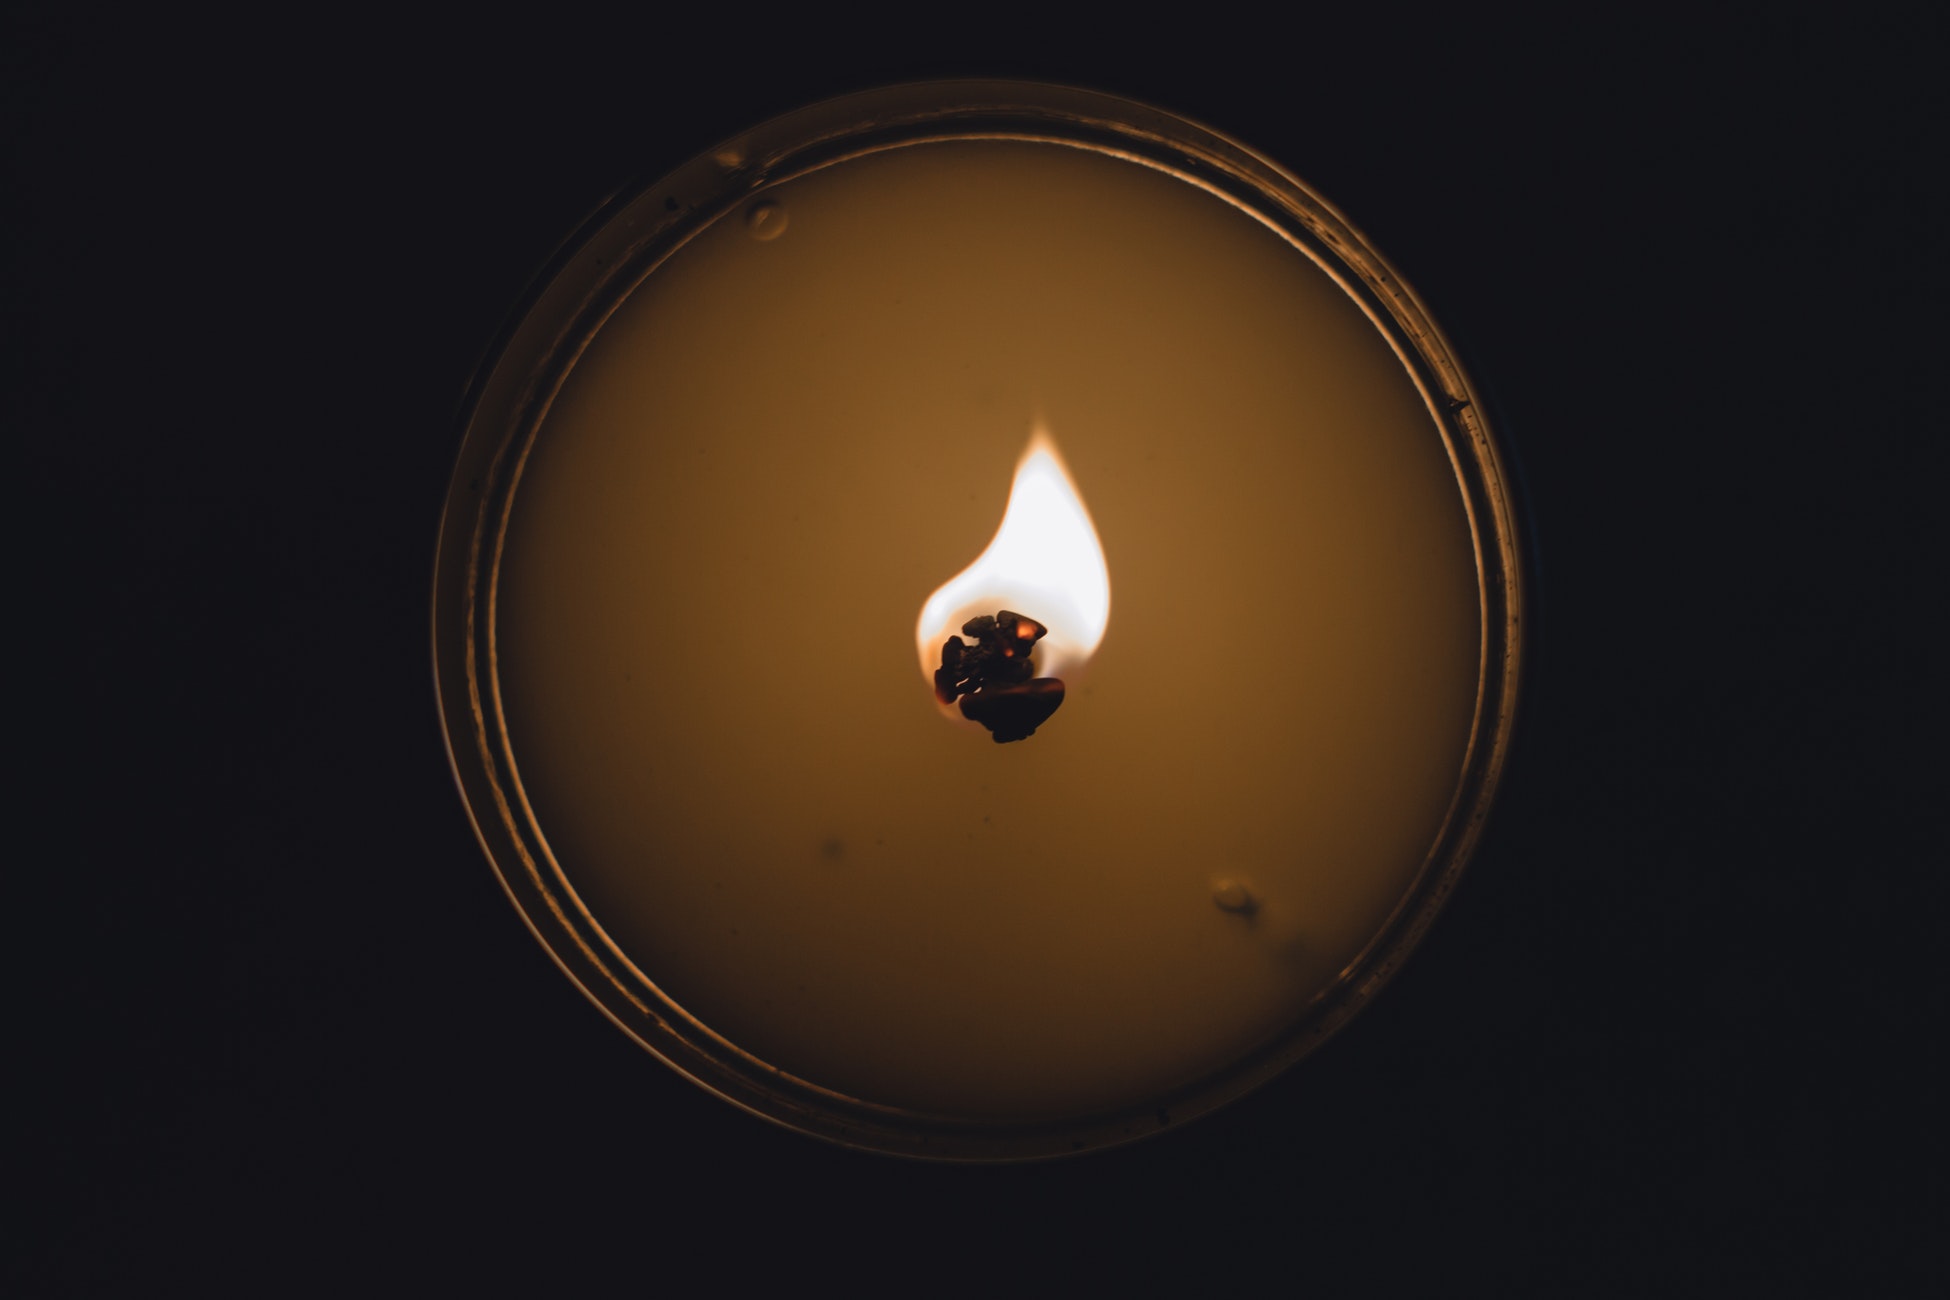 Things can change in an instant, even with just one small candle flame.